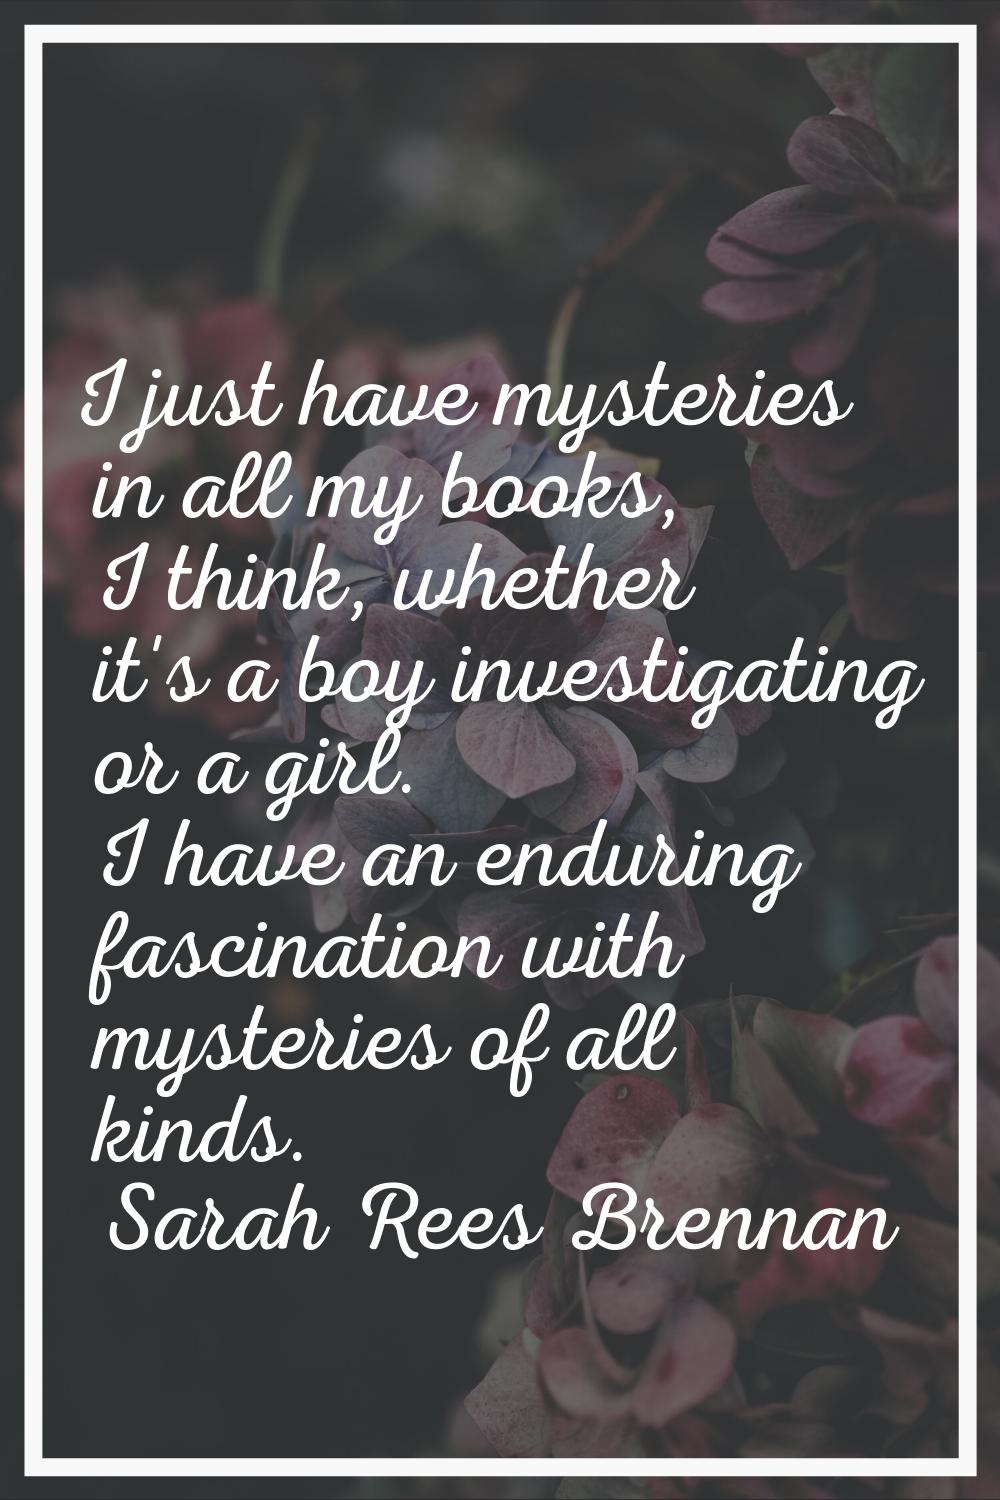 I just have mysteries in all my books, I think, whether it's a boy investigating or a girl. I have 